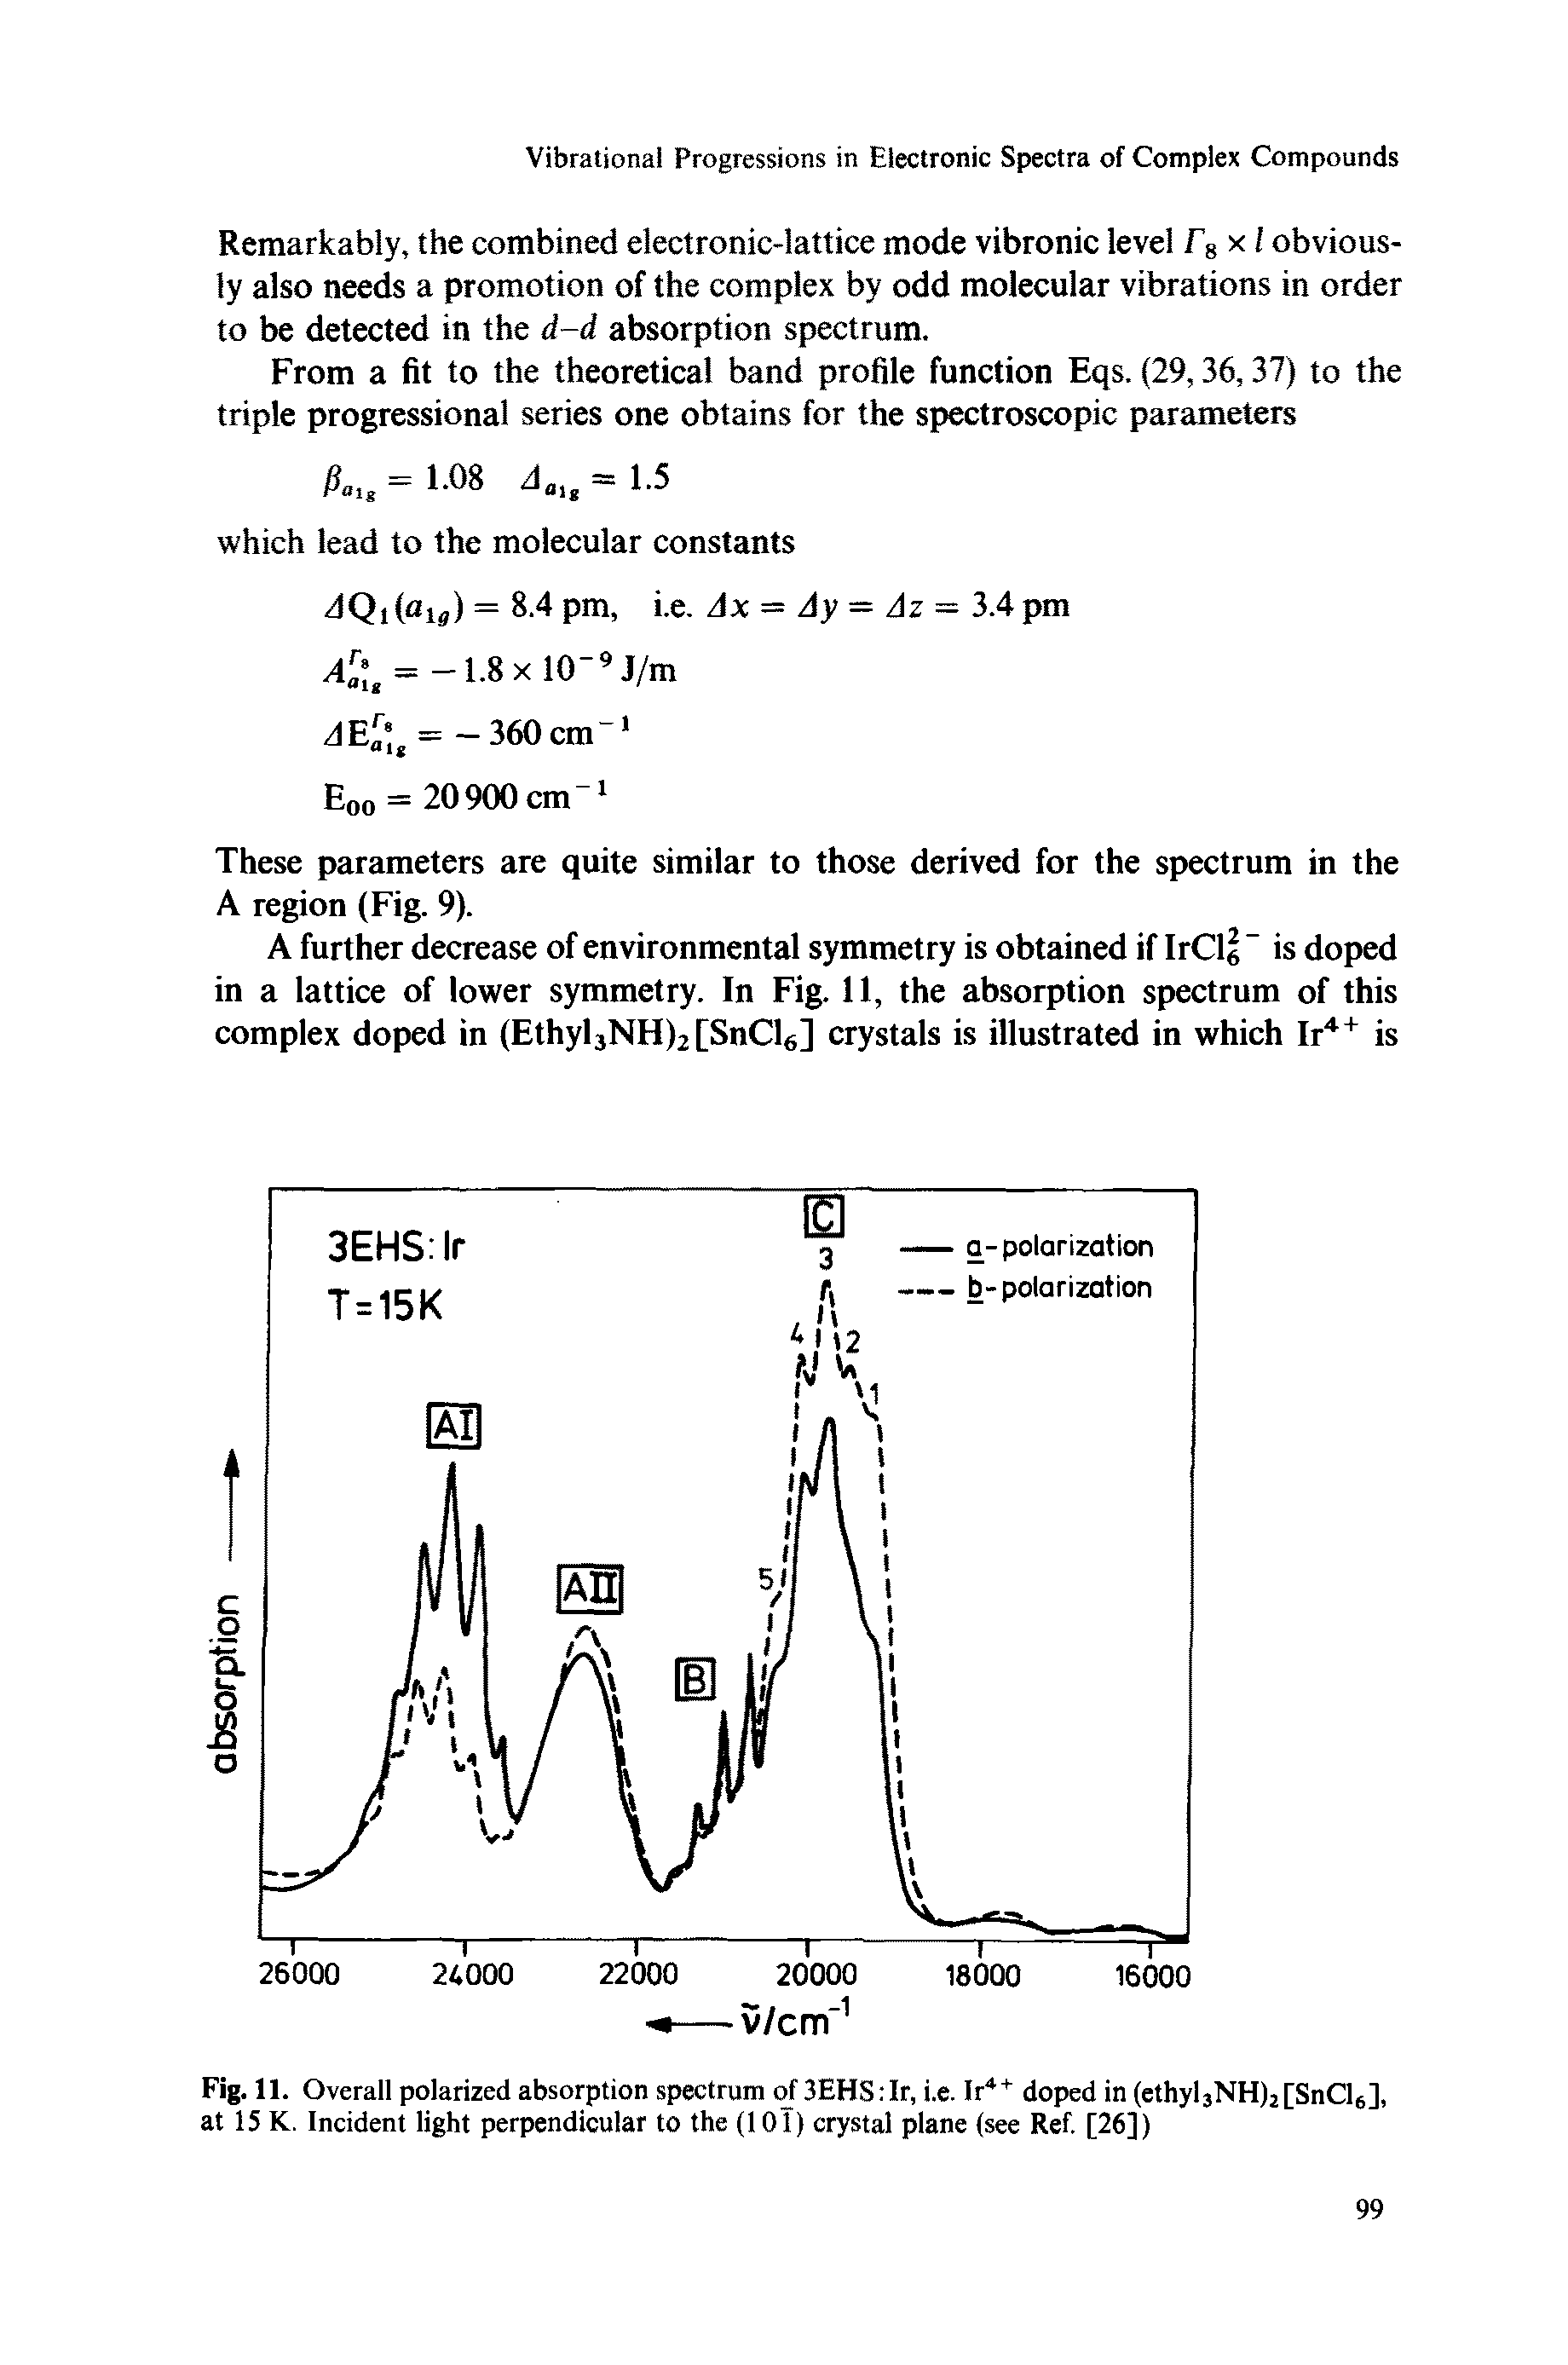 Fig. 11. Overall polarized absorption spectrum of 3EHS Ir, i.e. Ir4+ doped in (ethyl3NH)2[SnCl6], at 15 K. Incident light perpendicular to the (10T) crystal plane (see Ref. [26])...